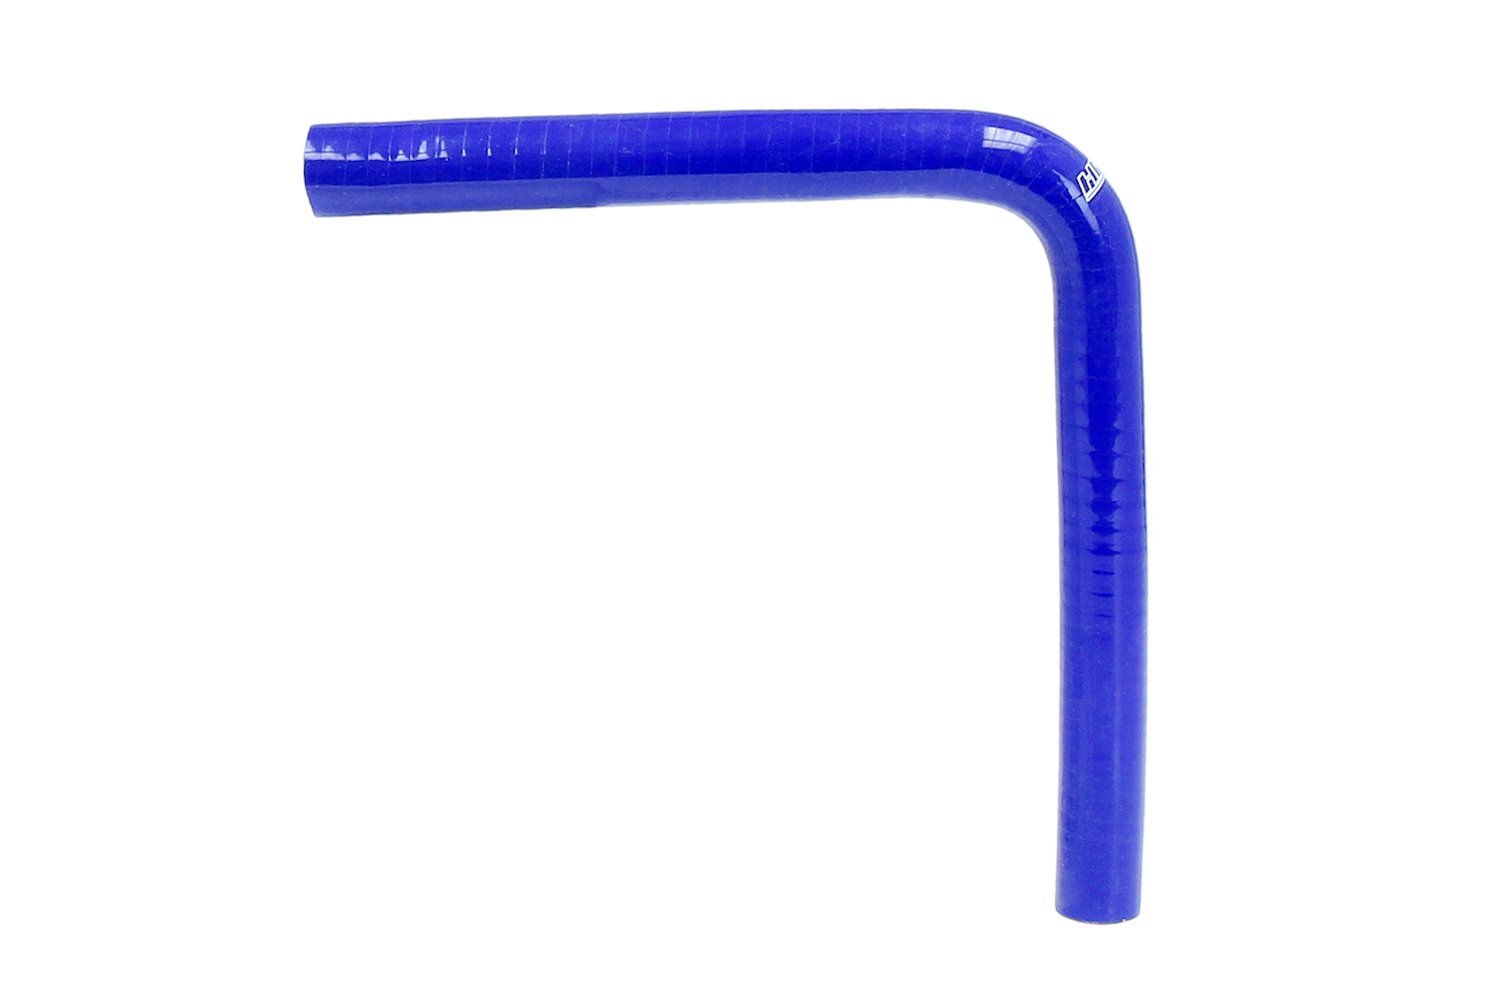 HTSEC90-025-BLUE Silicone 90-Degree Elbow Coupler Hose, High-Temp 4-Ply Reinforced, 1/4 in. ID, Blue